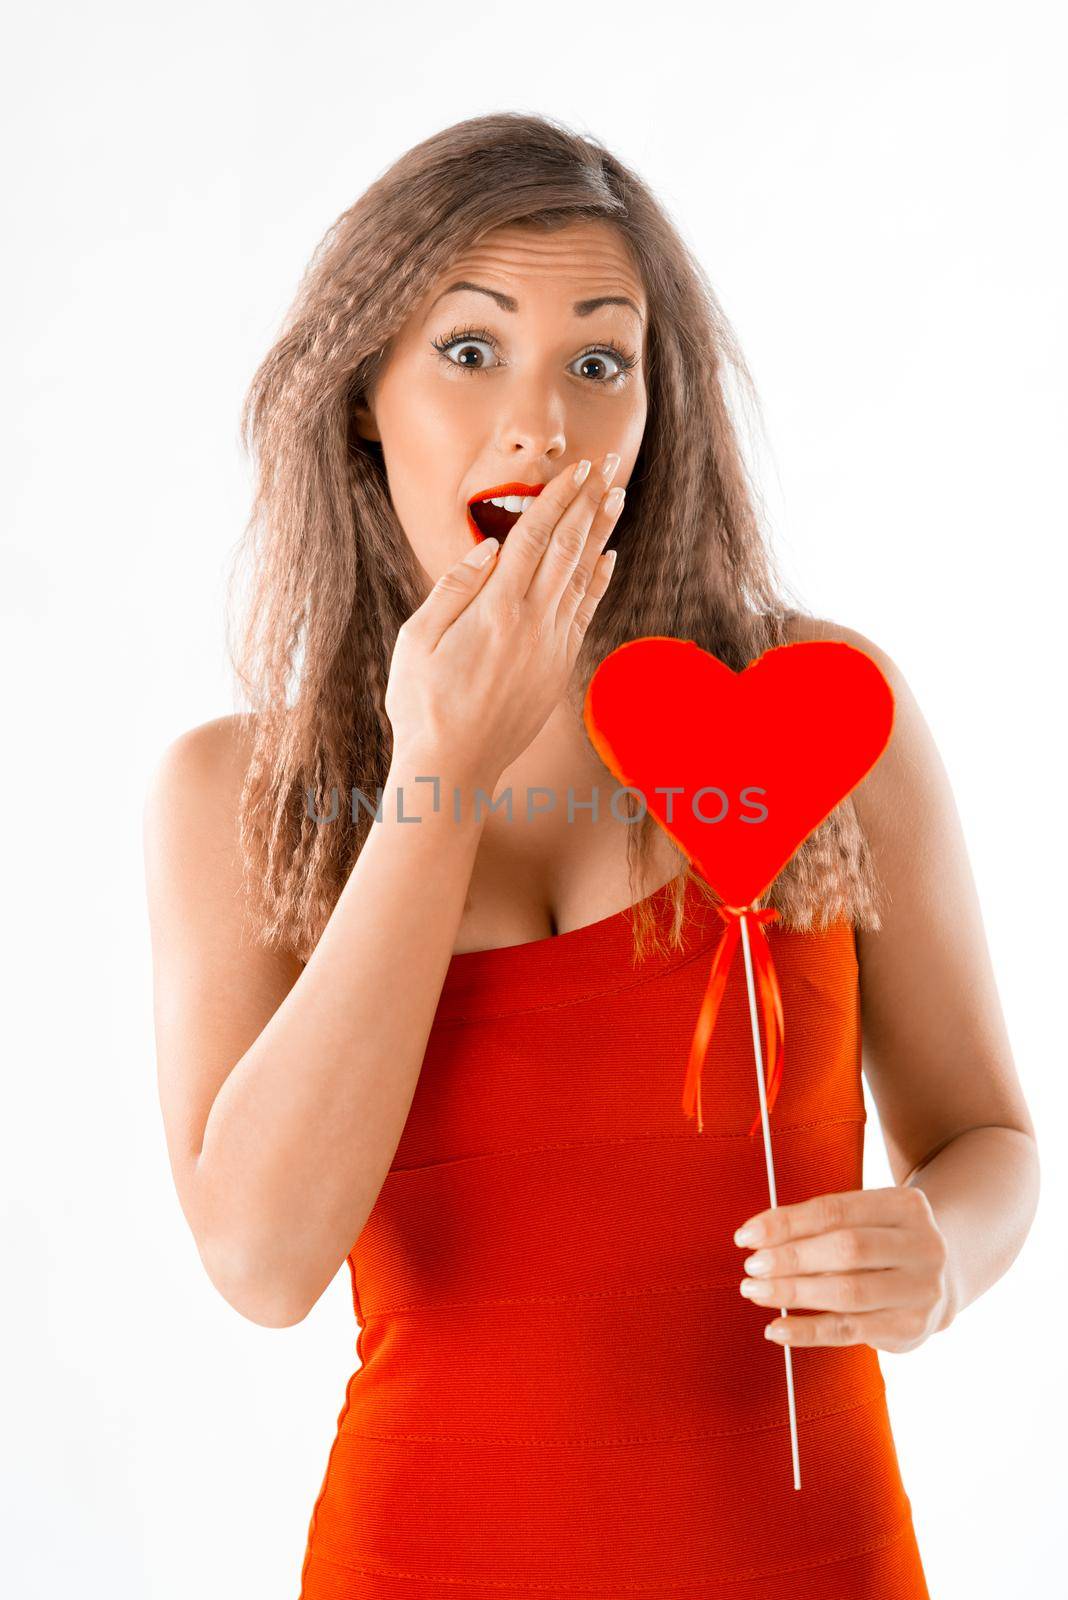 Beautiful surprised girl holding a red heart. Looking at camera.